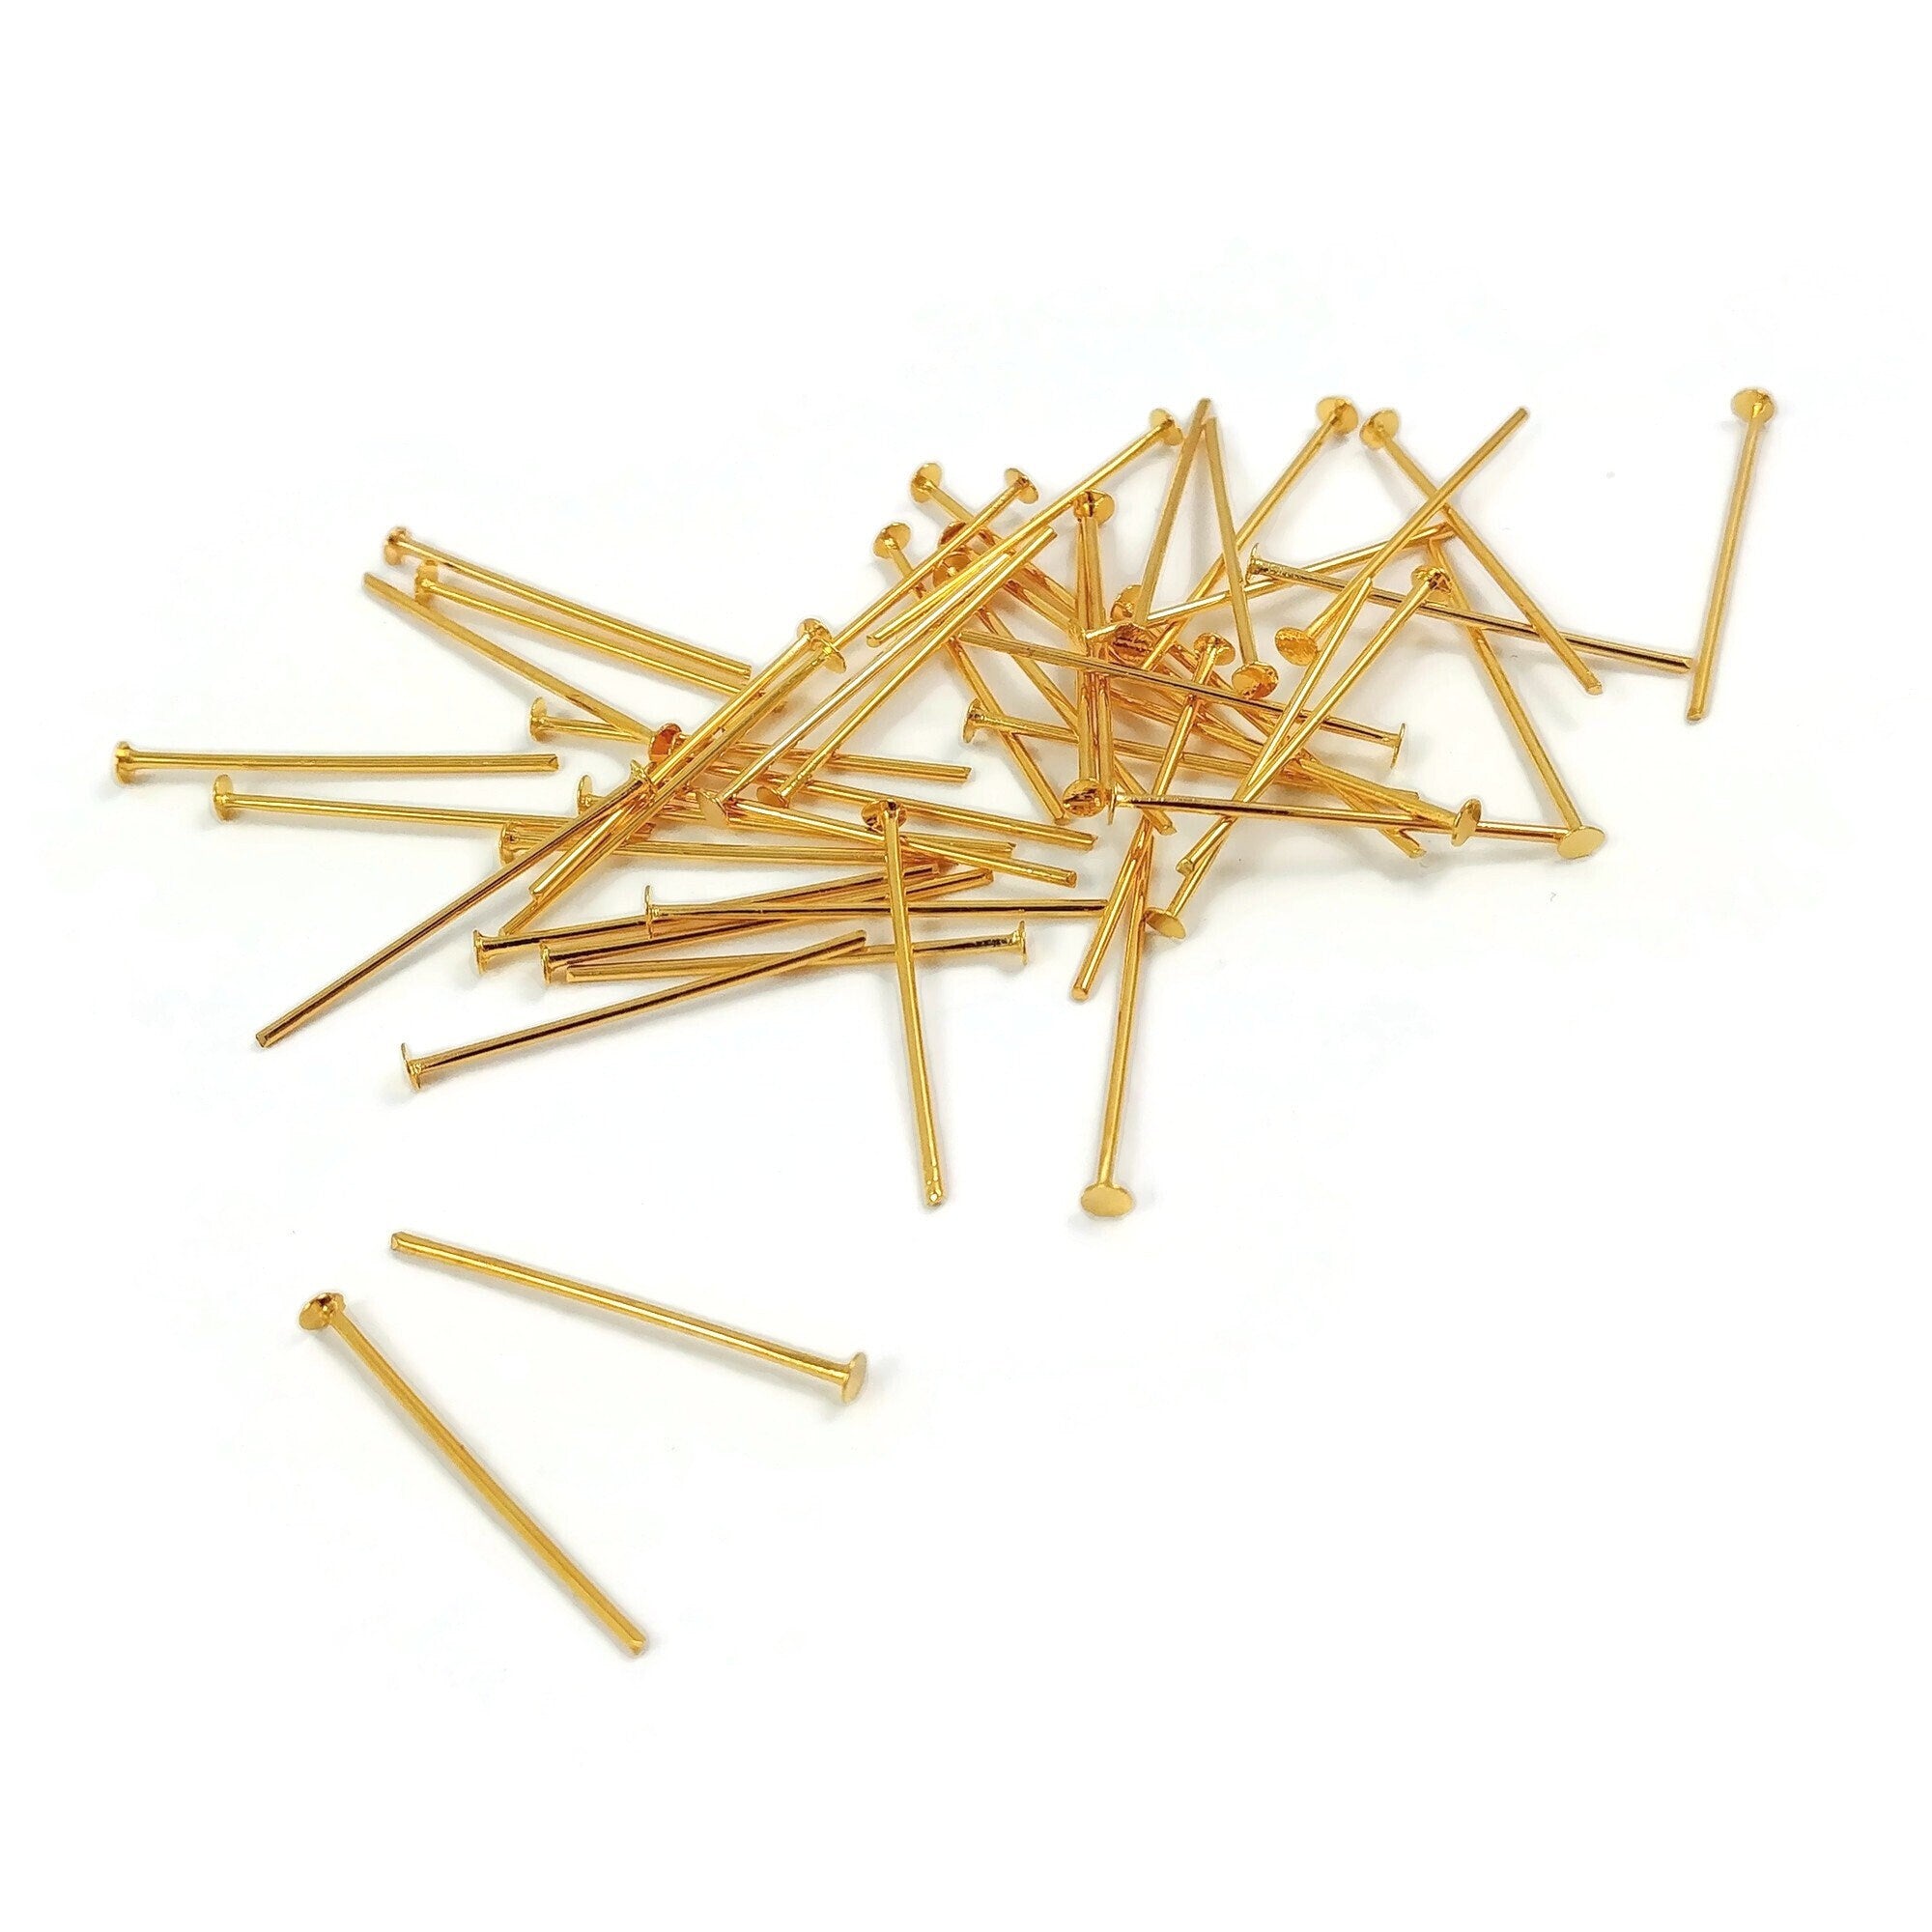 Real 18K gold plated head pins - 20mm or 35mm - Nickel free jewelry findings - 21 gauge